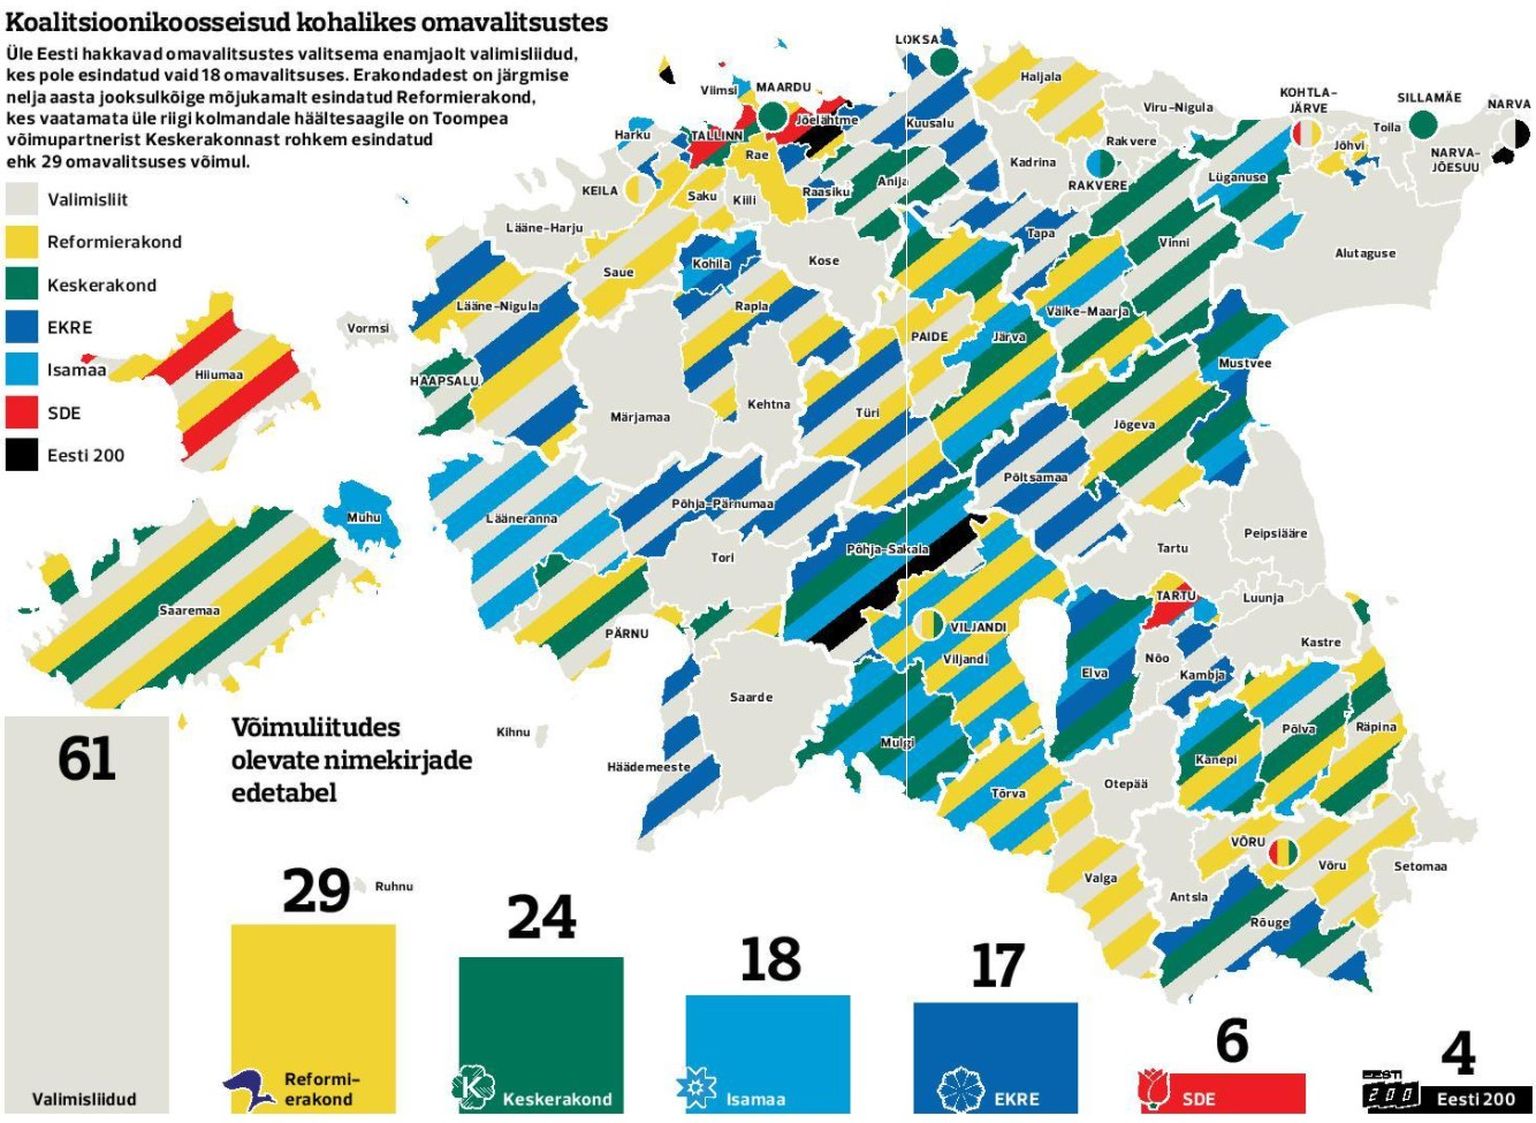 Overview of incoming local government coalitions. Election coalition - gray; Reform Party - yellow; Center Party - Green; EKRE - dark blue; Isamaa - light blue; SDE - red; Eesti 200 - black